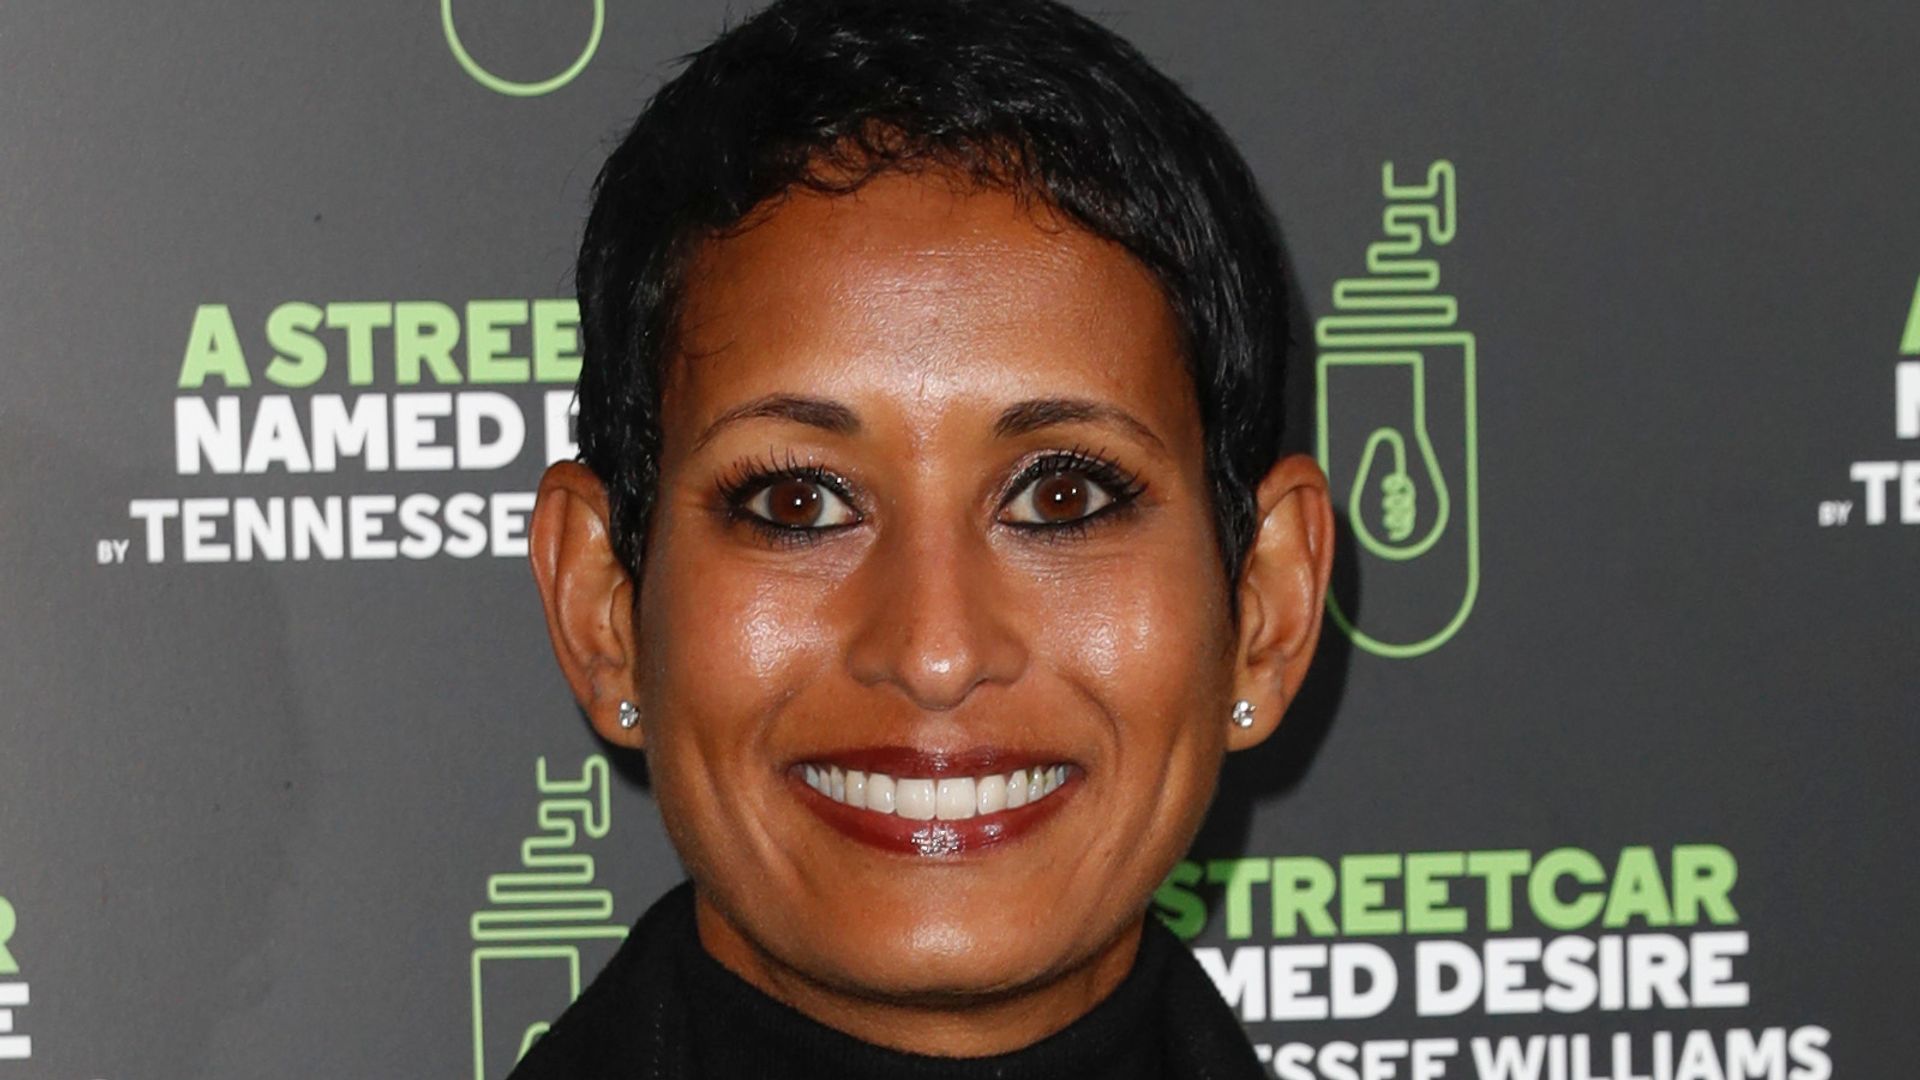 Naga Munchetty attends "A Streetcar Named Desire" West End Opening at the Phoenix Theatre